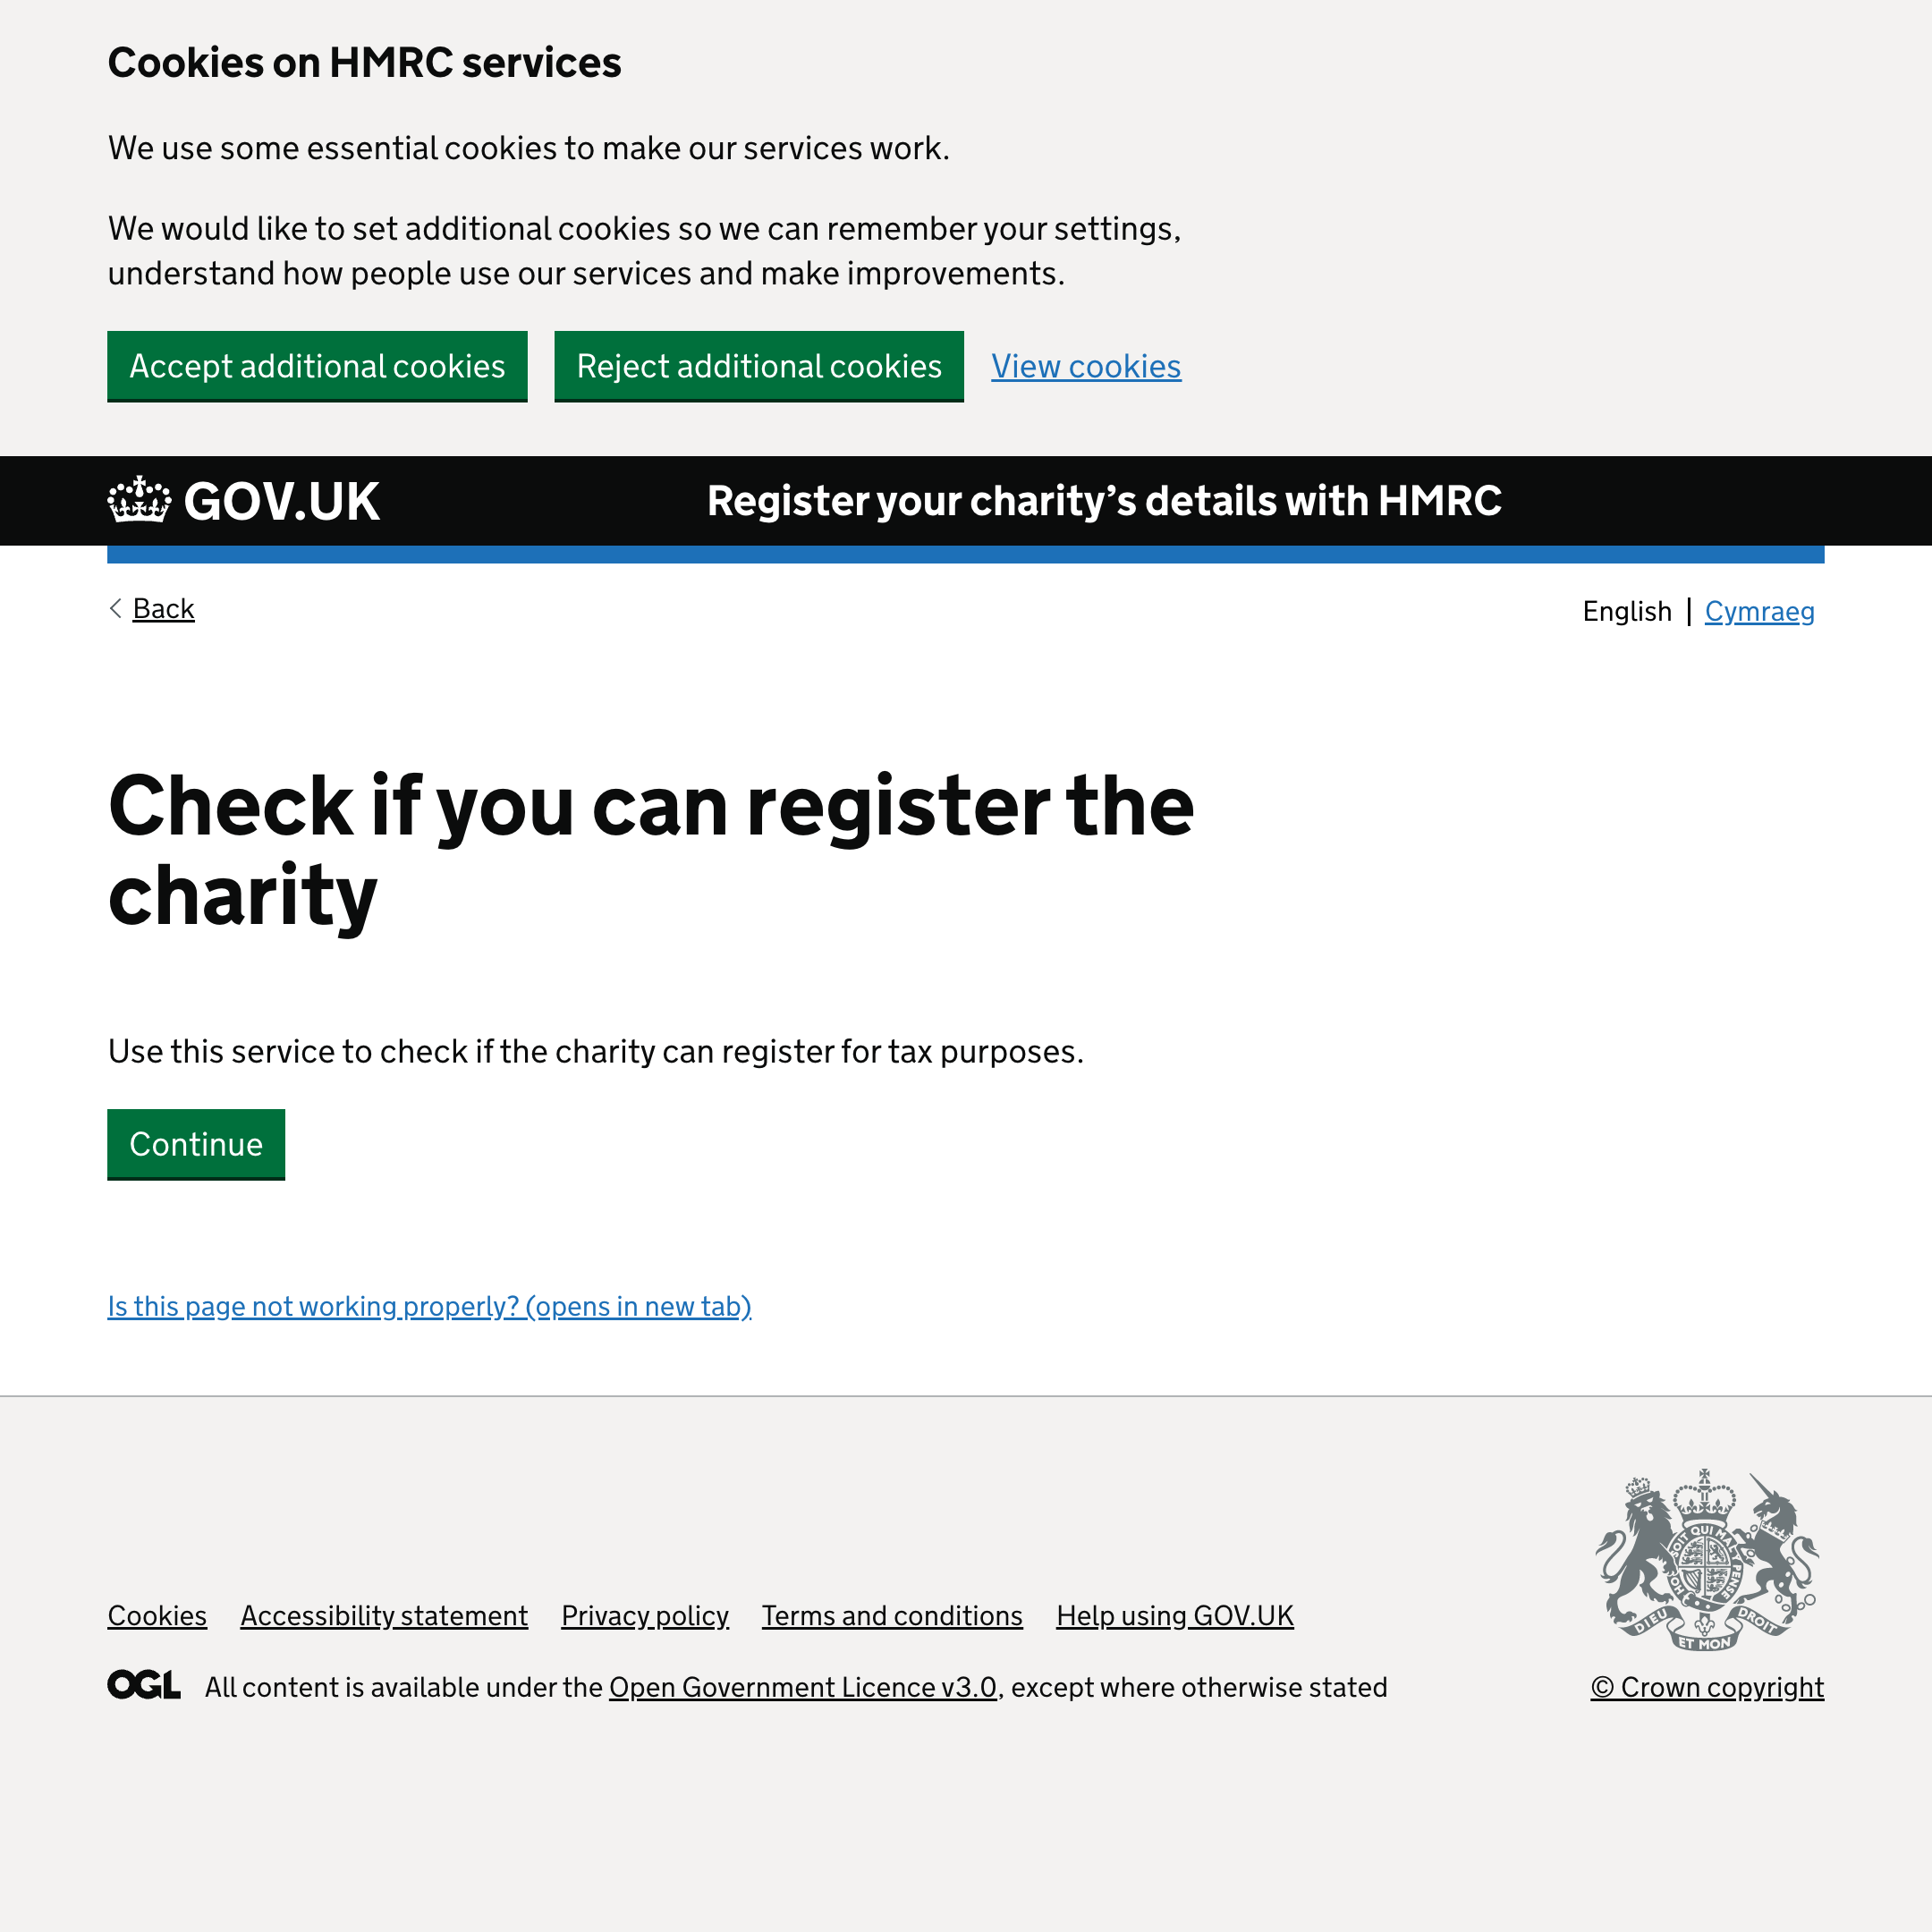 Register your charity’s details with HMRC